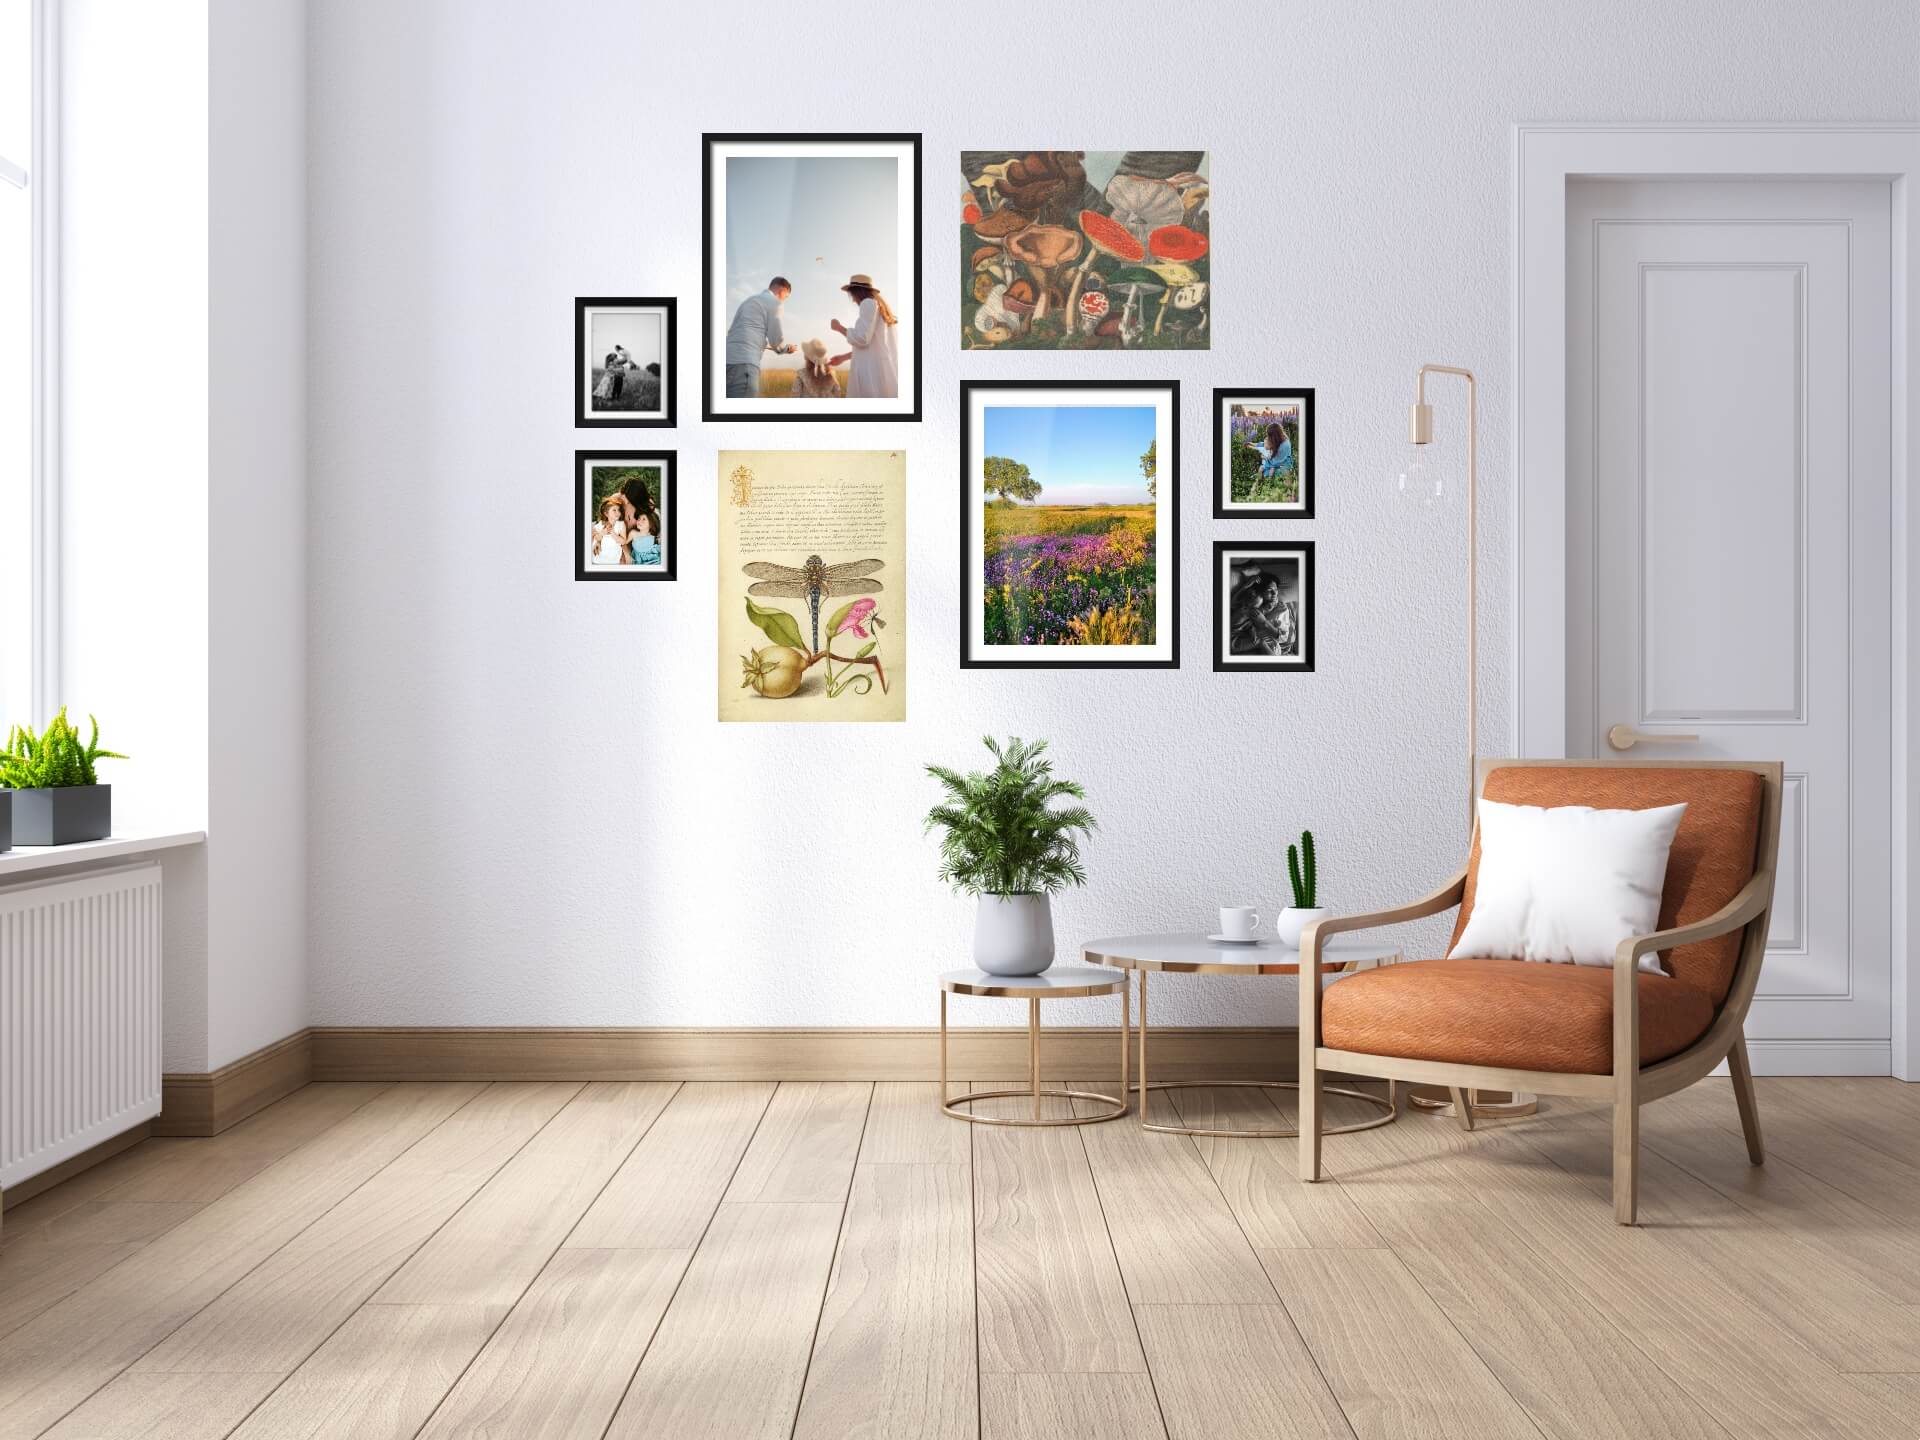 The $100 Gallery Wall